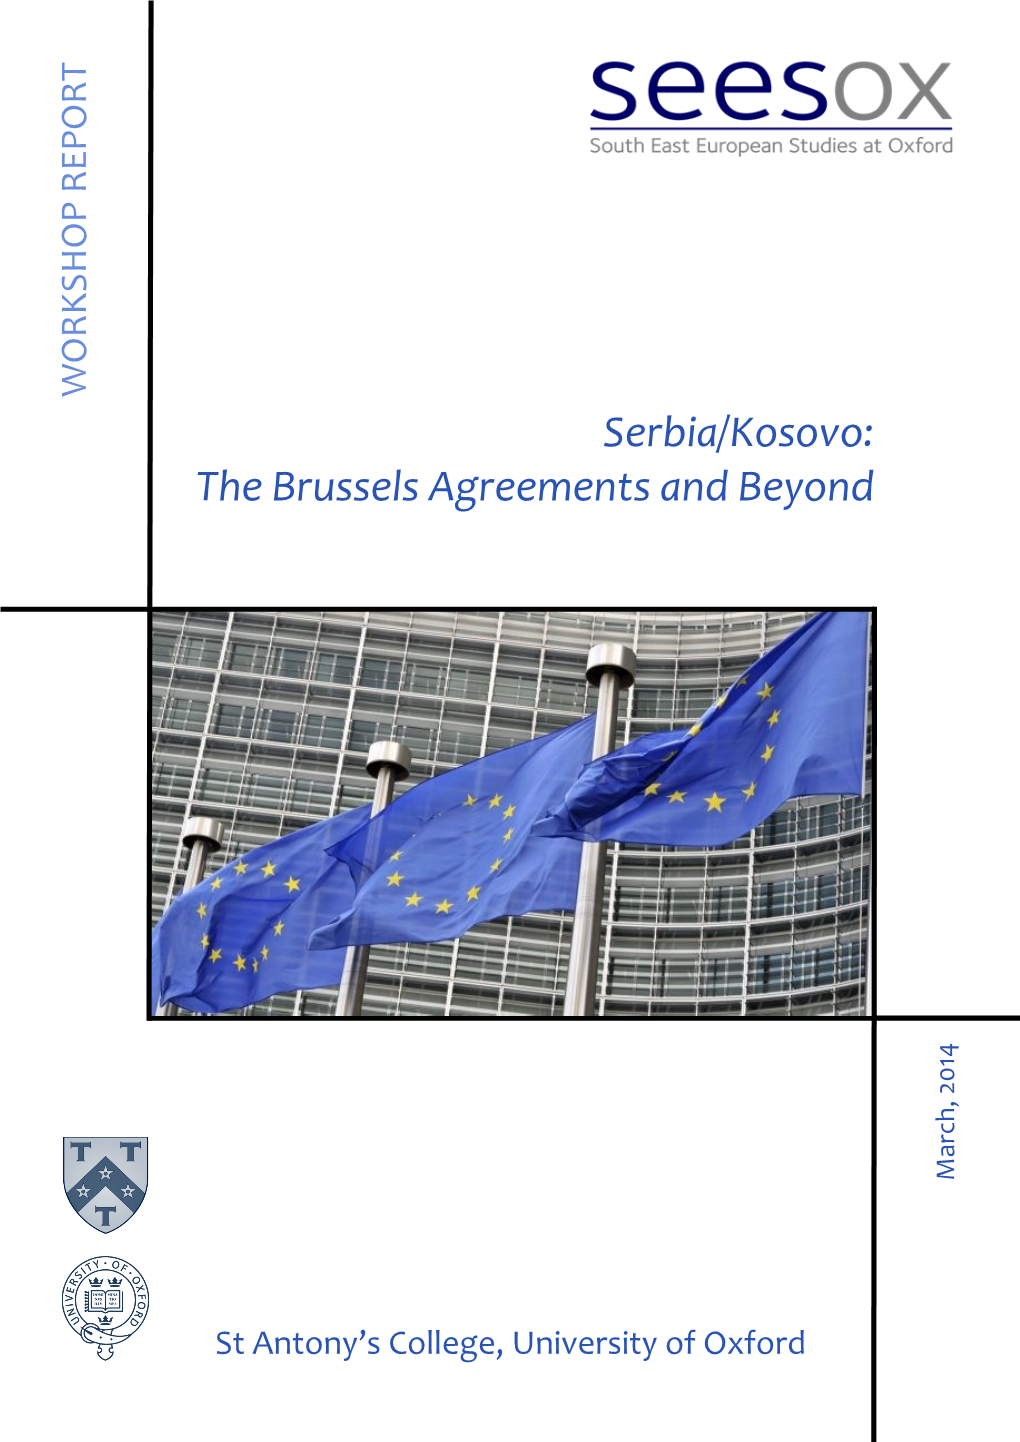 Serbia/Kosovo: the Brussels Agreements and Beyond